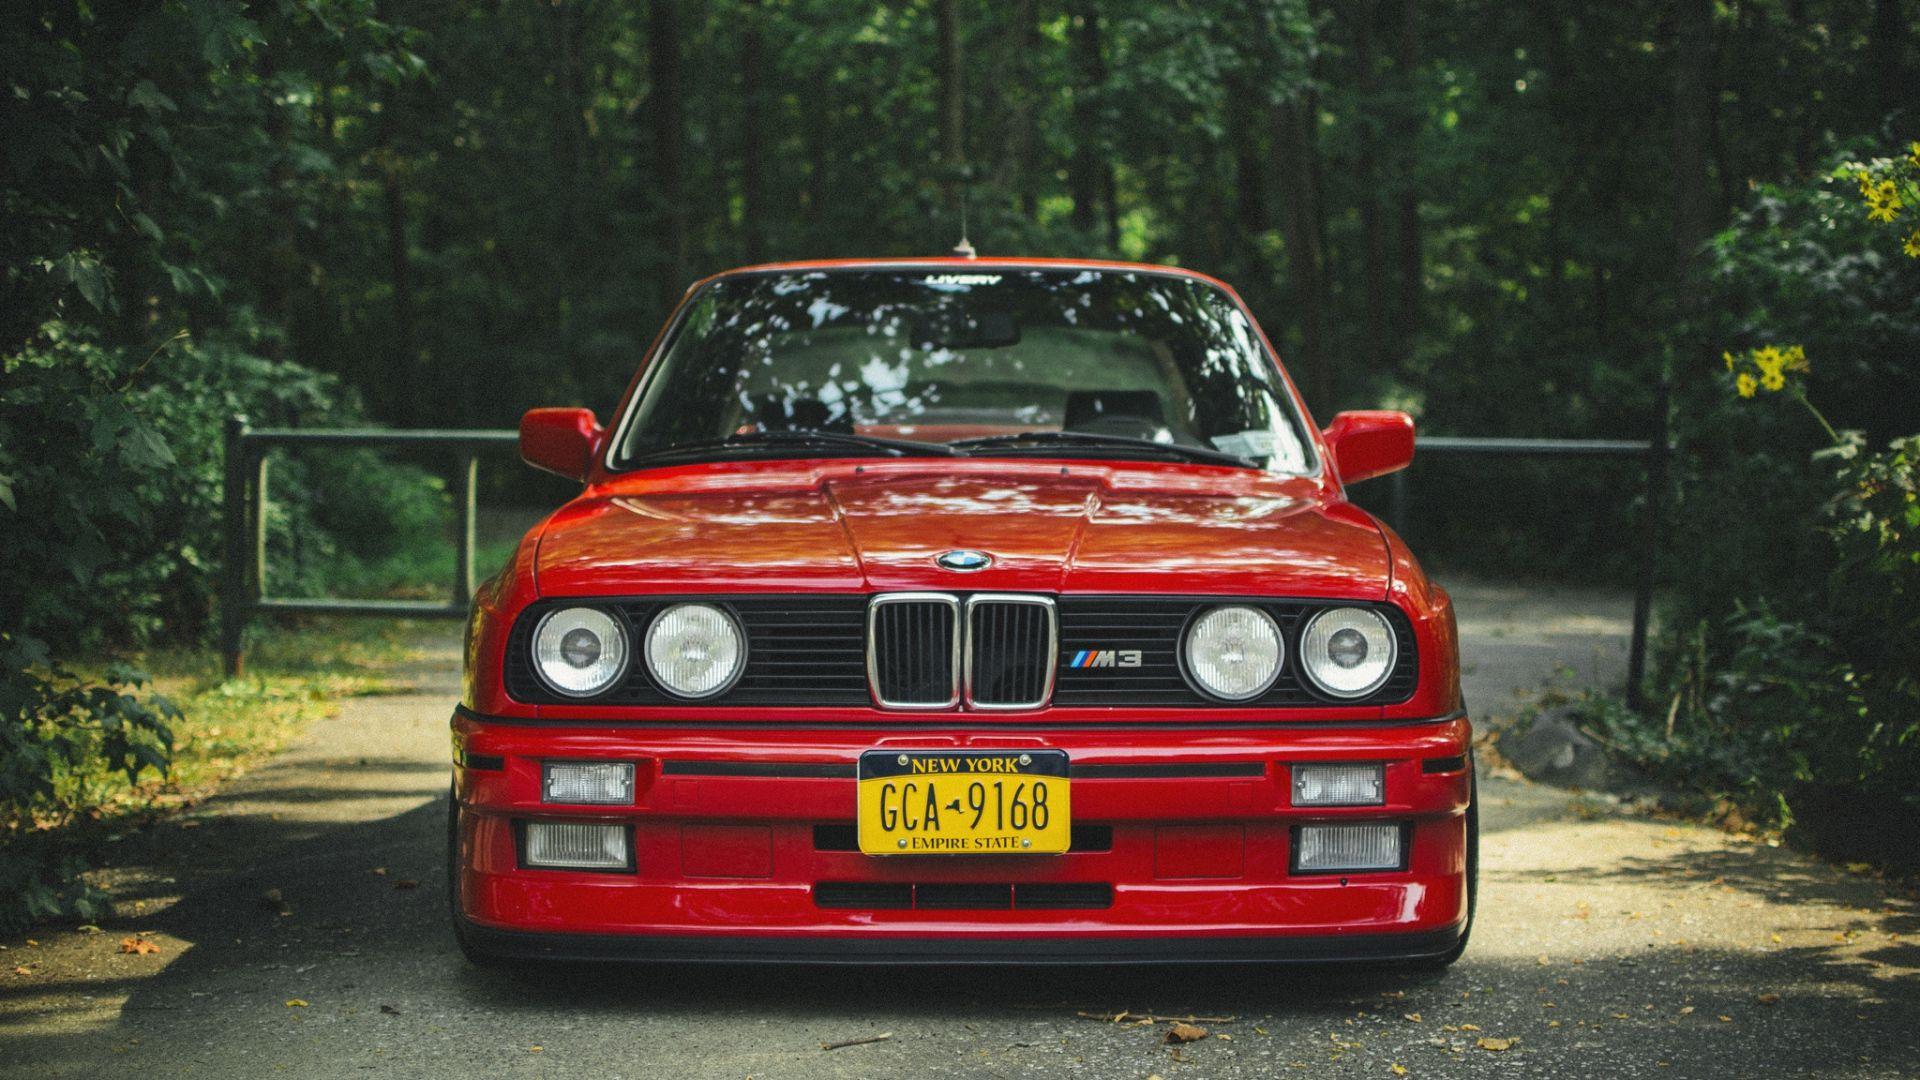 Download Wallpaper 1920x1080 bmw, e m red, tuning Full HD 1080p